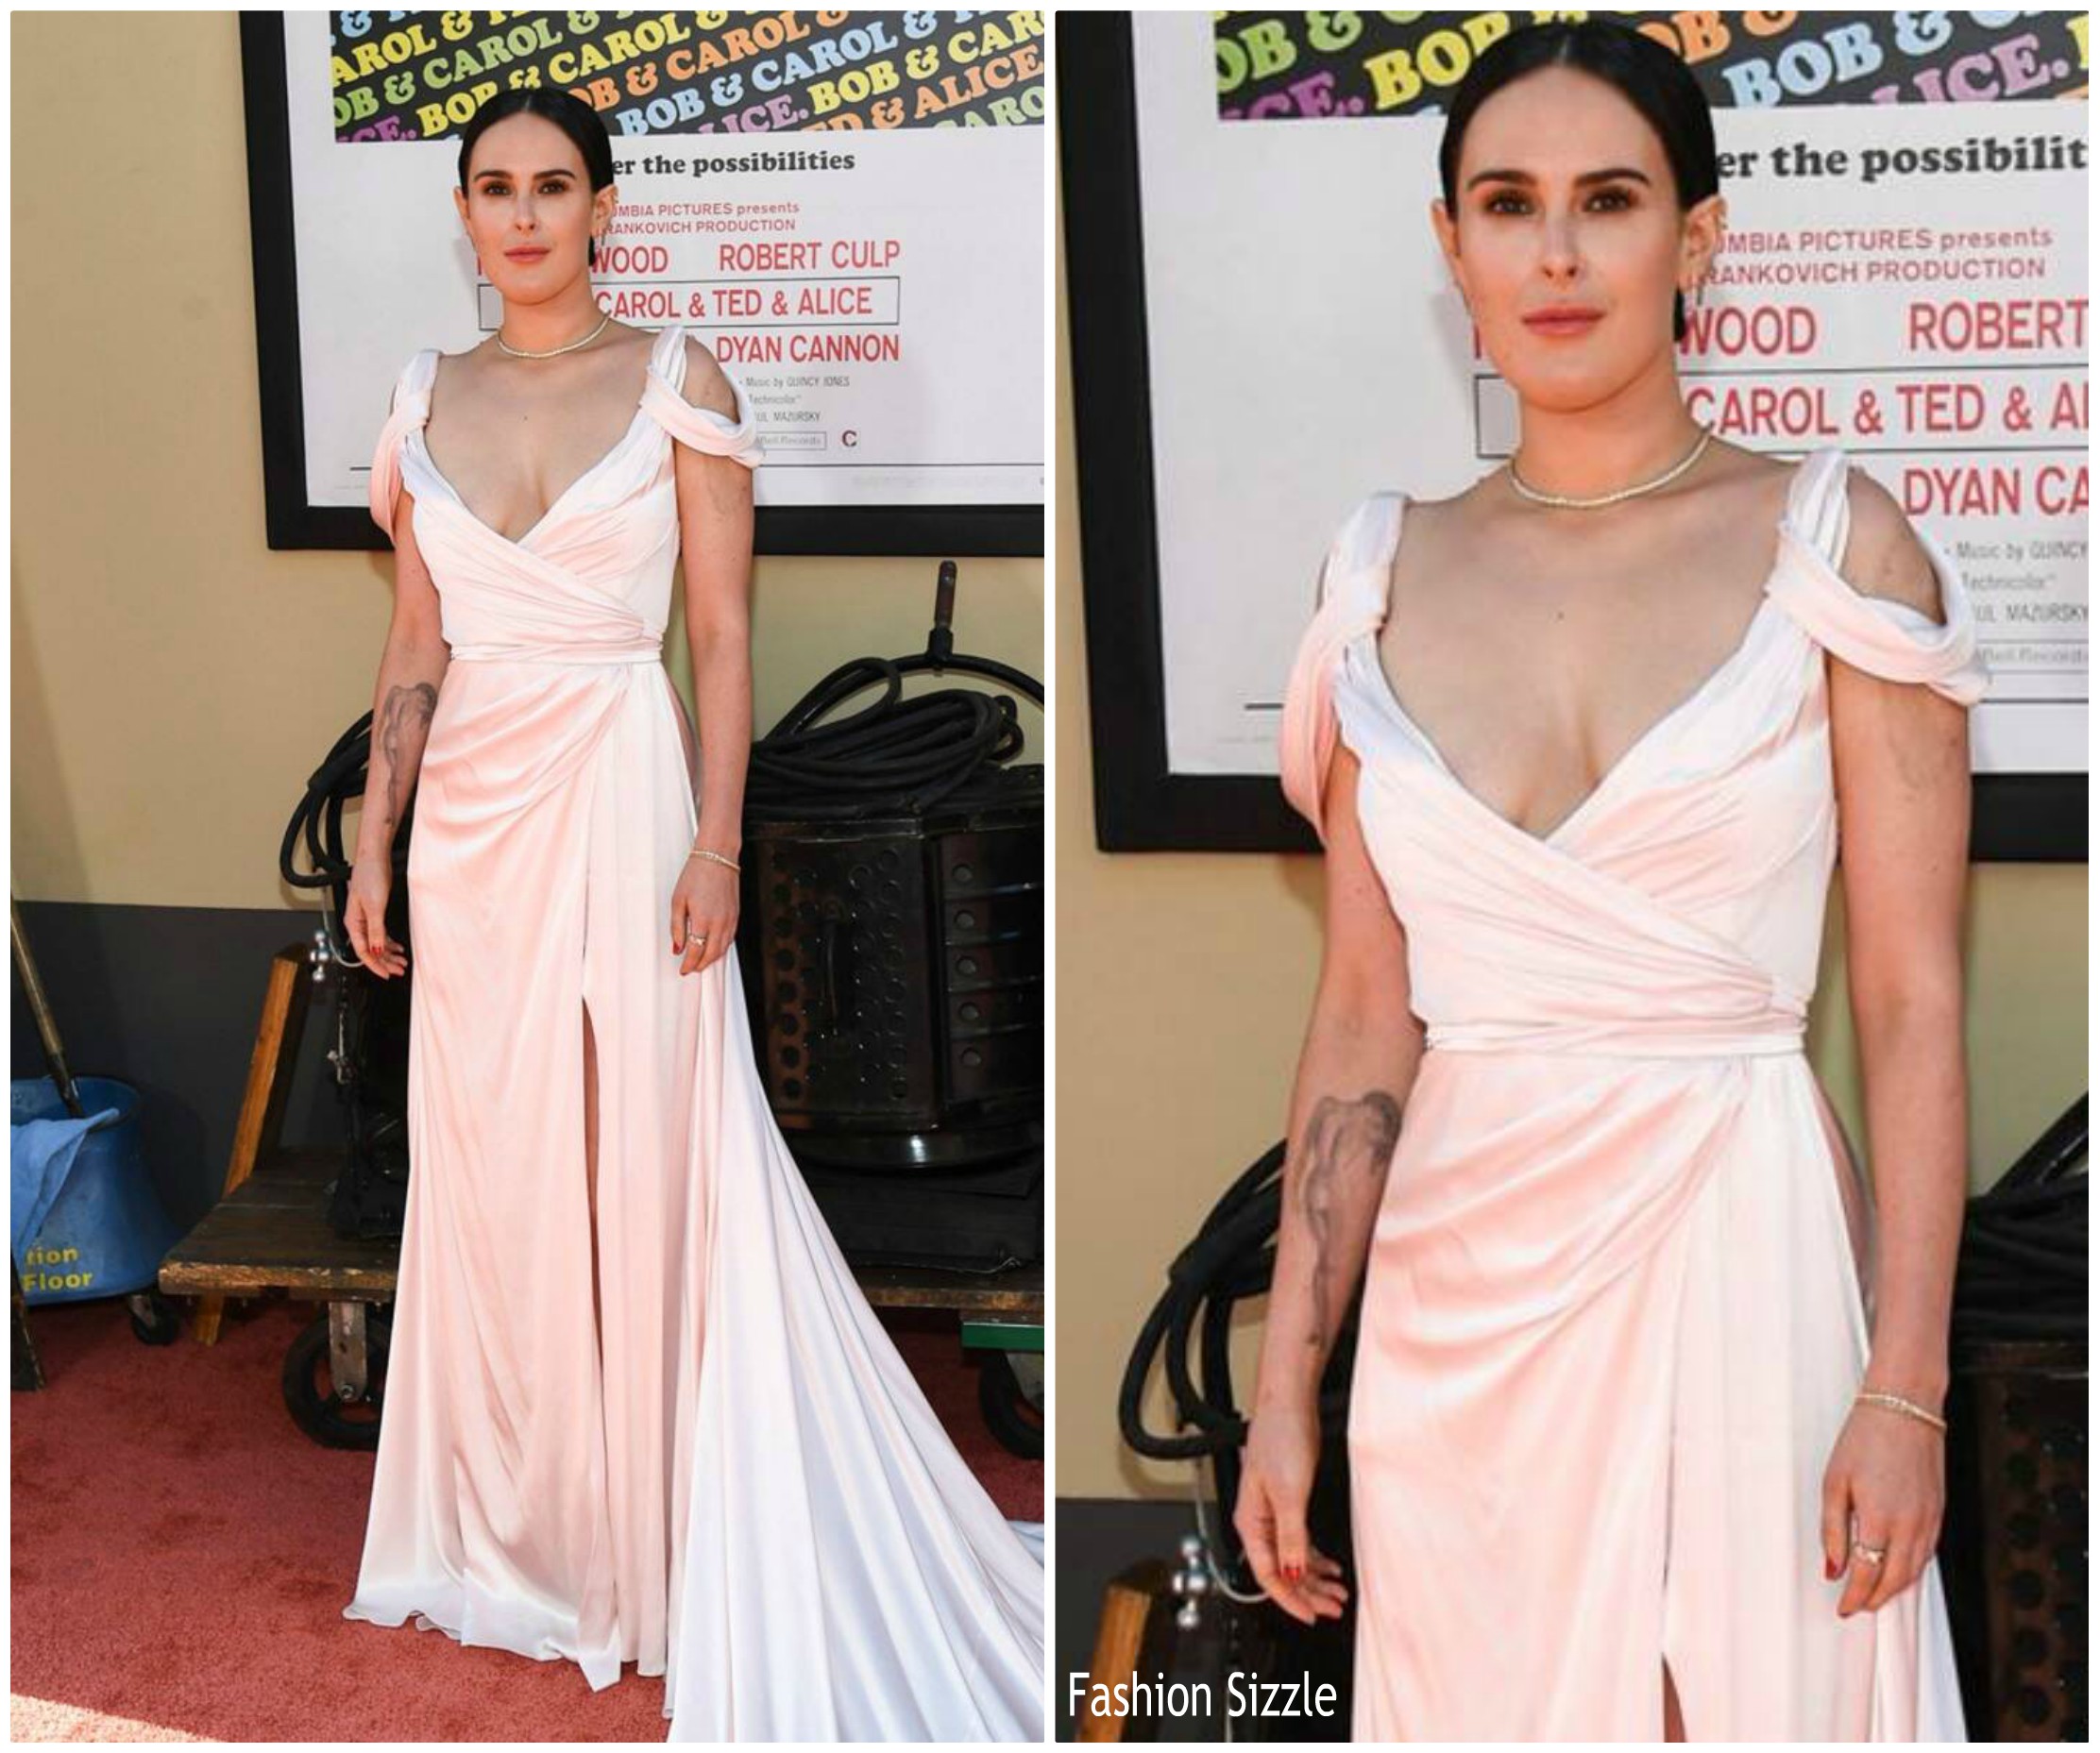 rummer-willis-in-ong-oaj-pairam-once-upon-a-time-hollywood-la-premiere